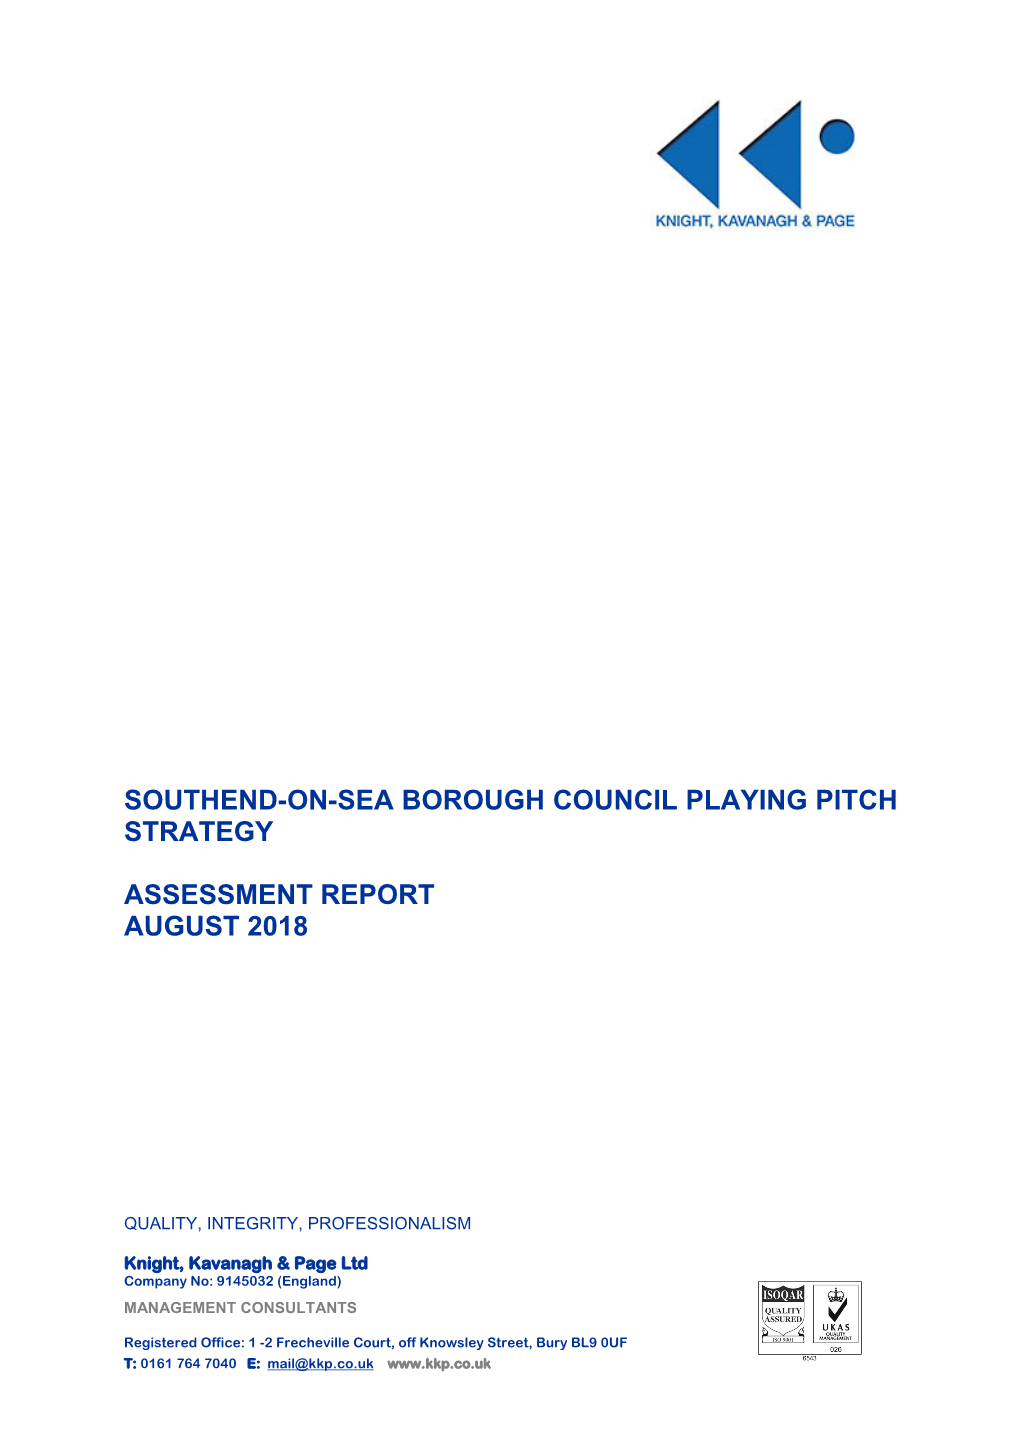 Southend-On-Sea Borough Council Playing Pitch Strategy Assessment